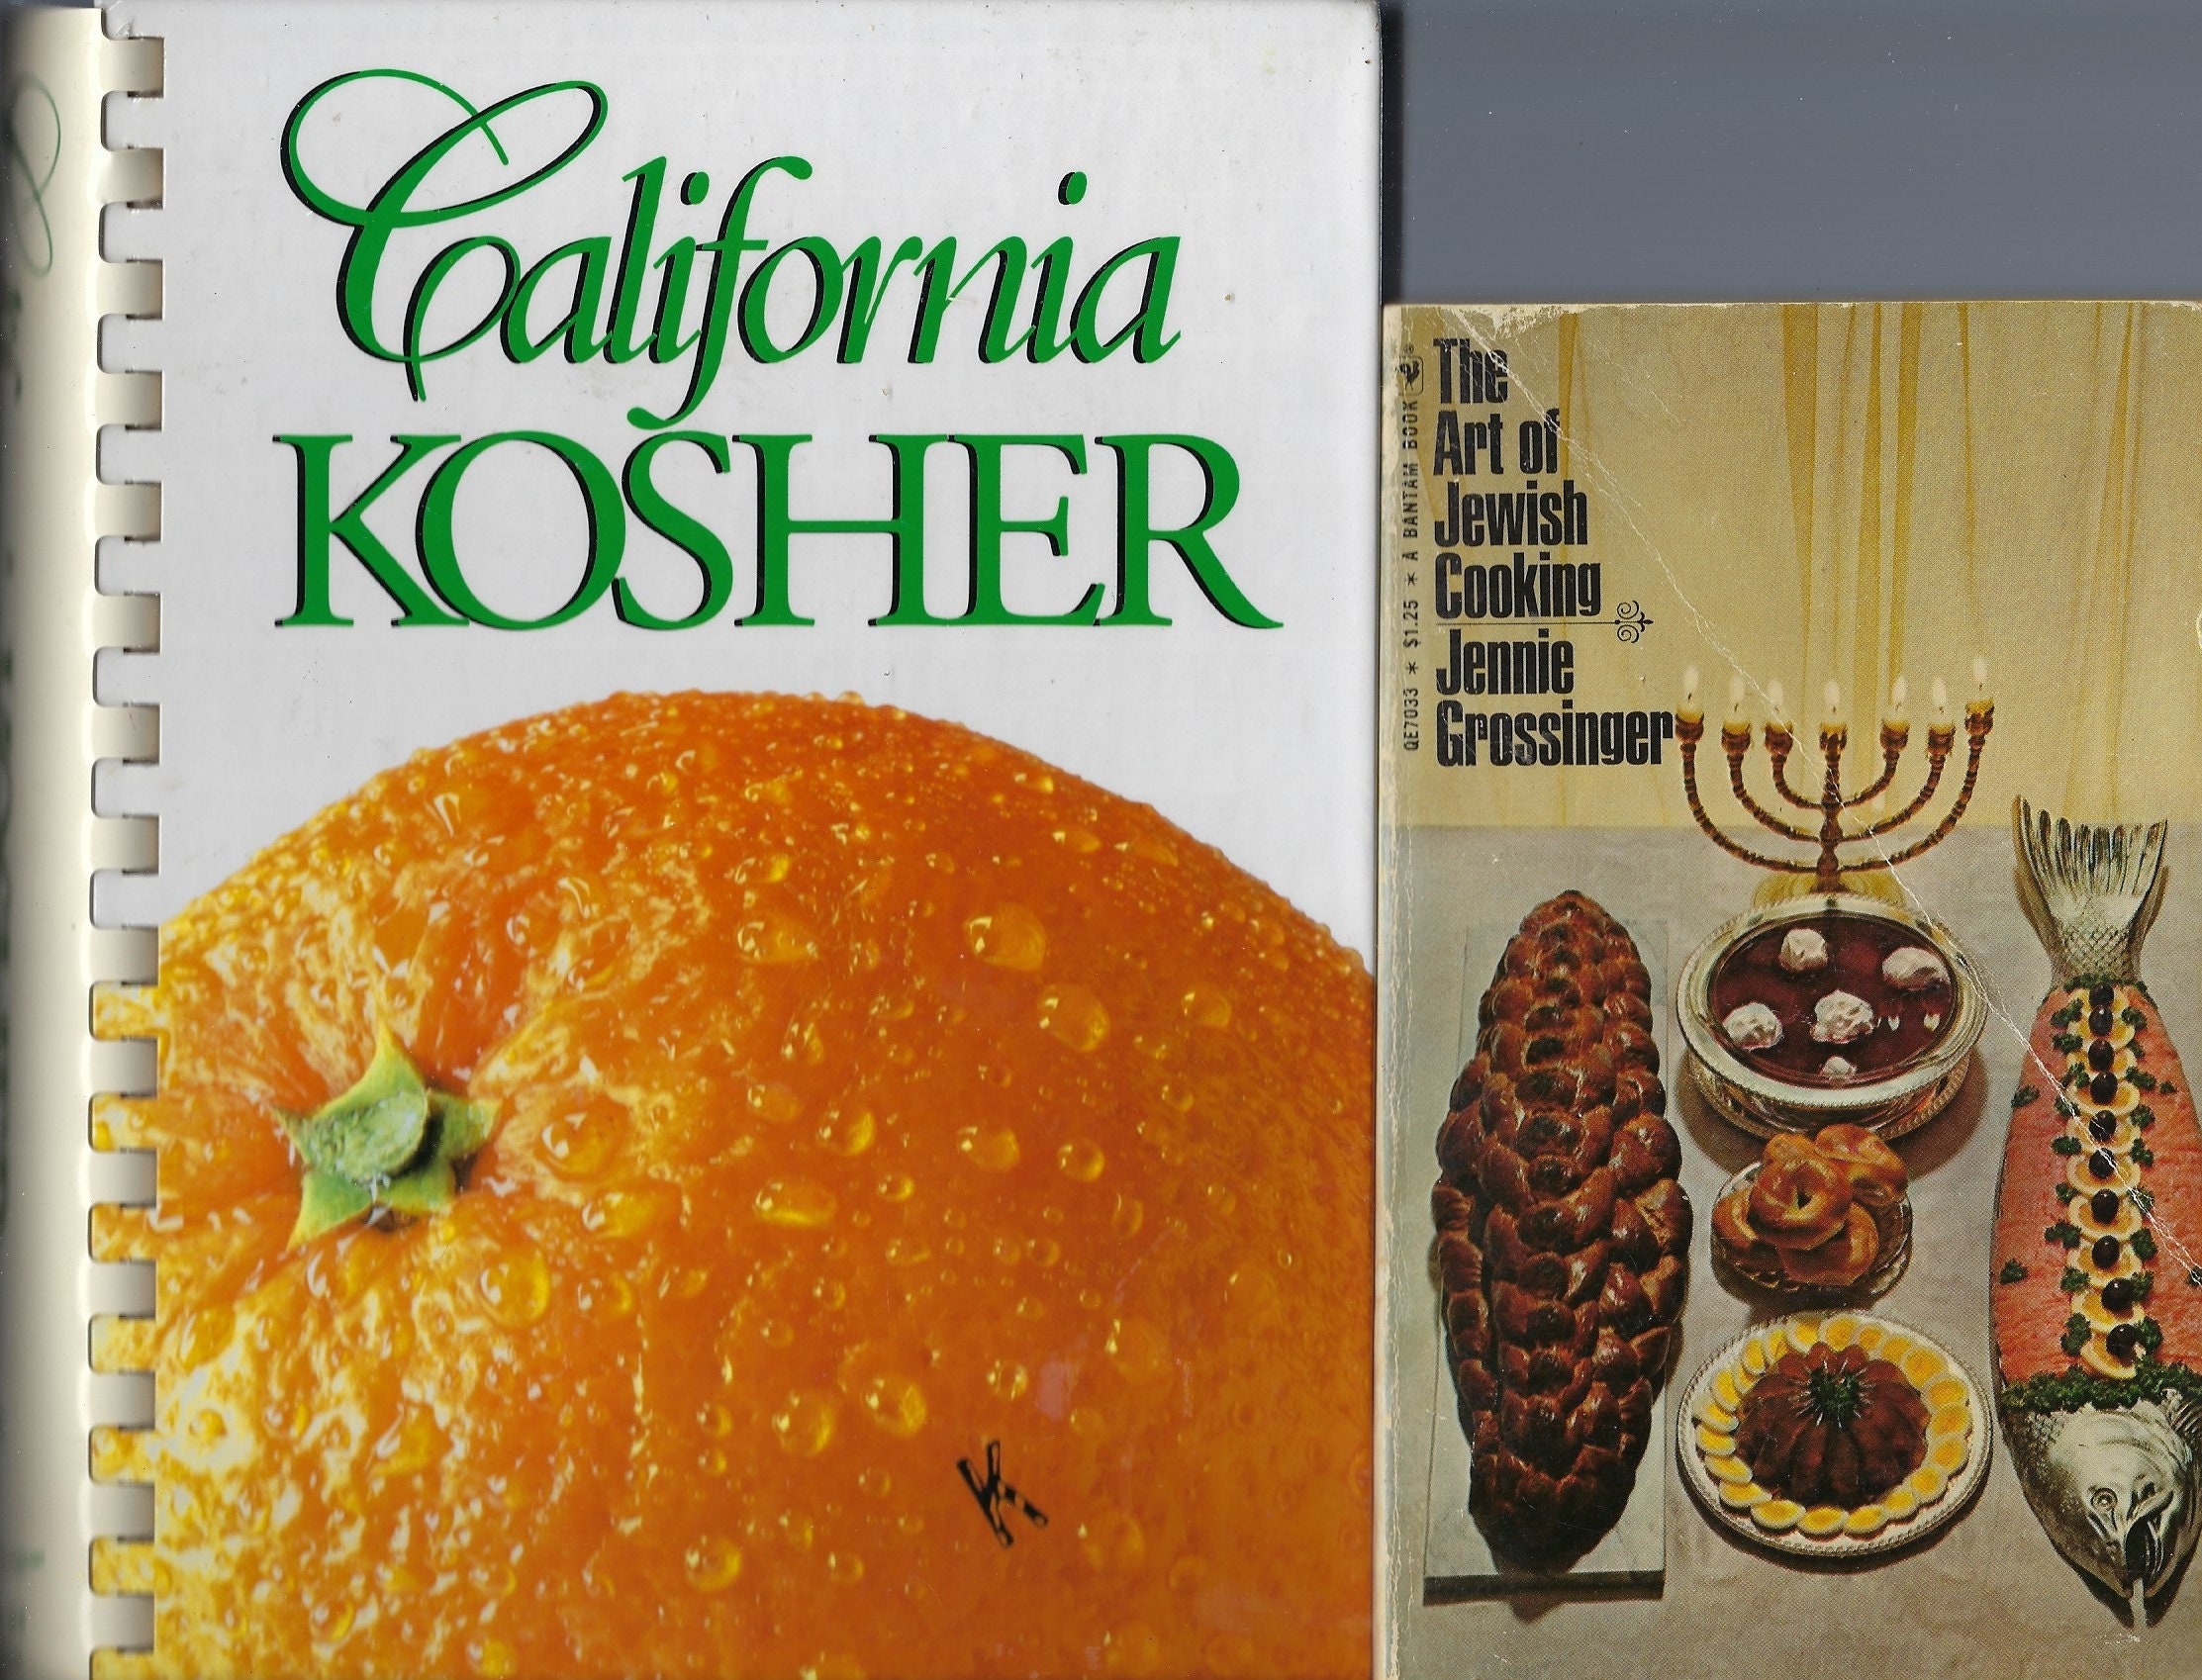 Lot Of 2 Ethnic Jewish Vintage Cookbooks North Hollywood California Kosher & The Art Cooking By Jennie Grossinger Tradional Rare